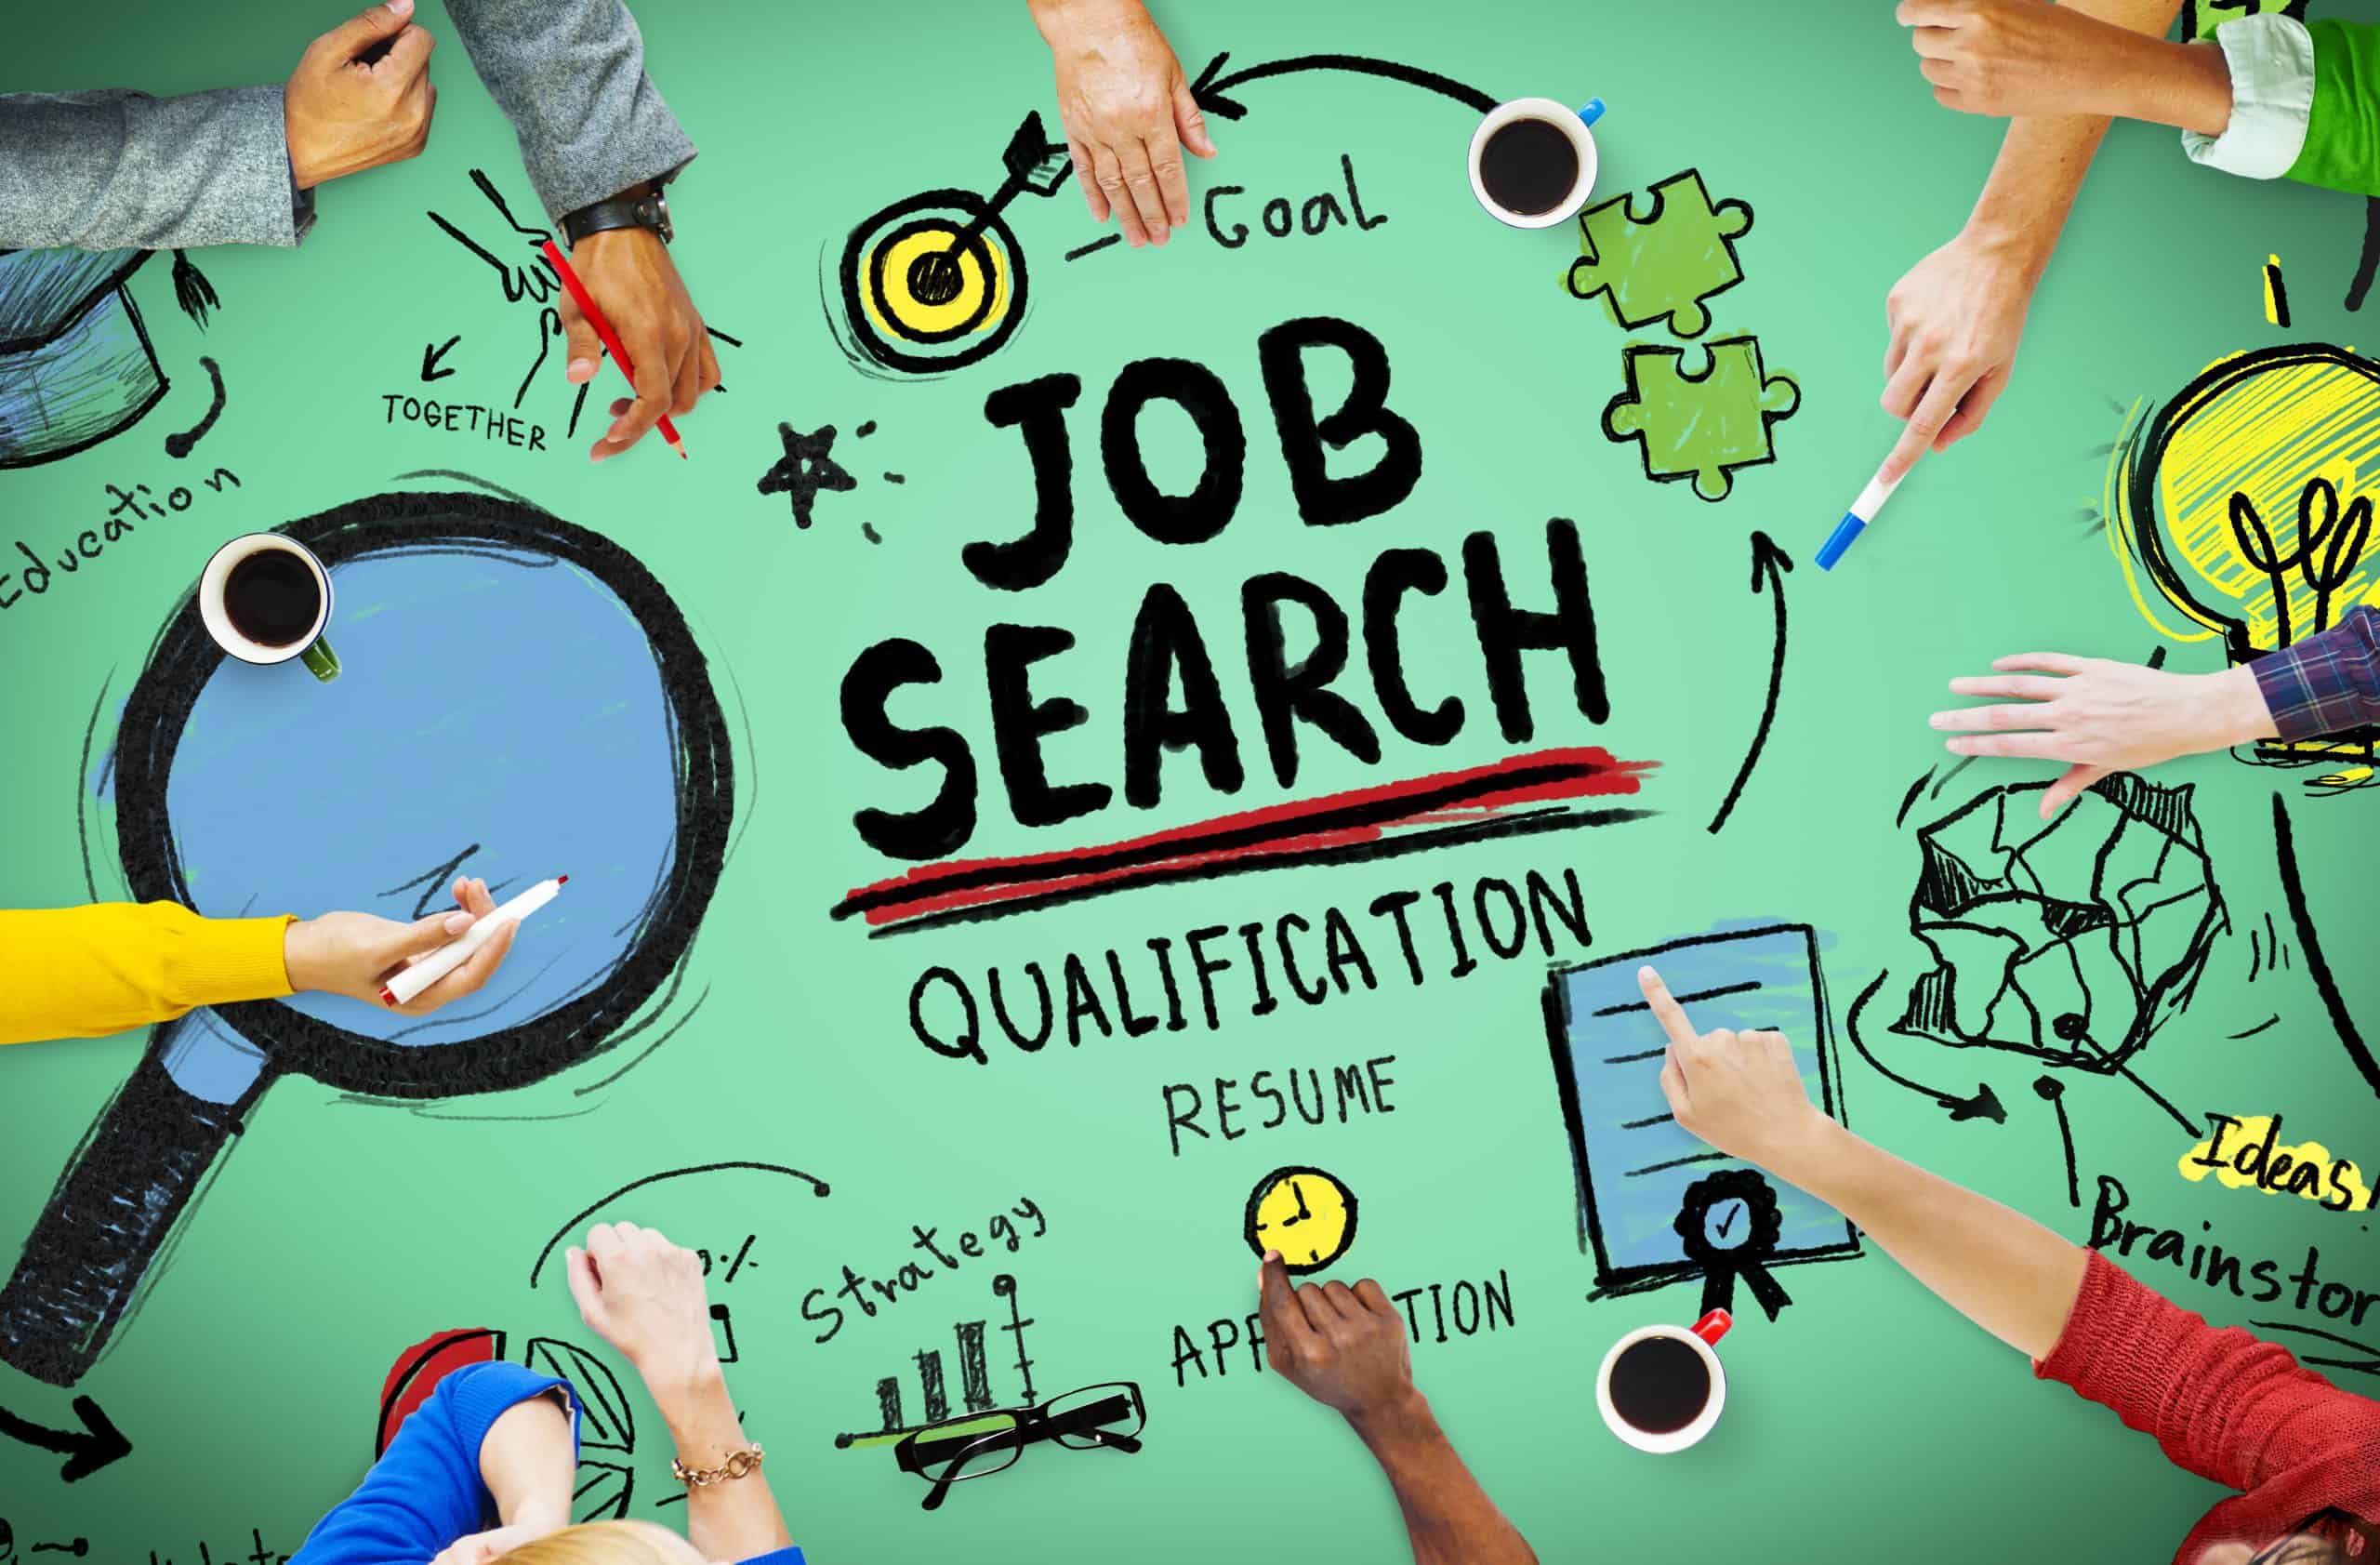 What is job search strategy - brainstorming